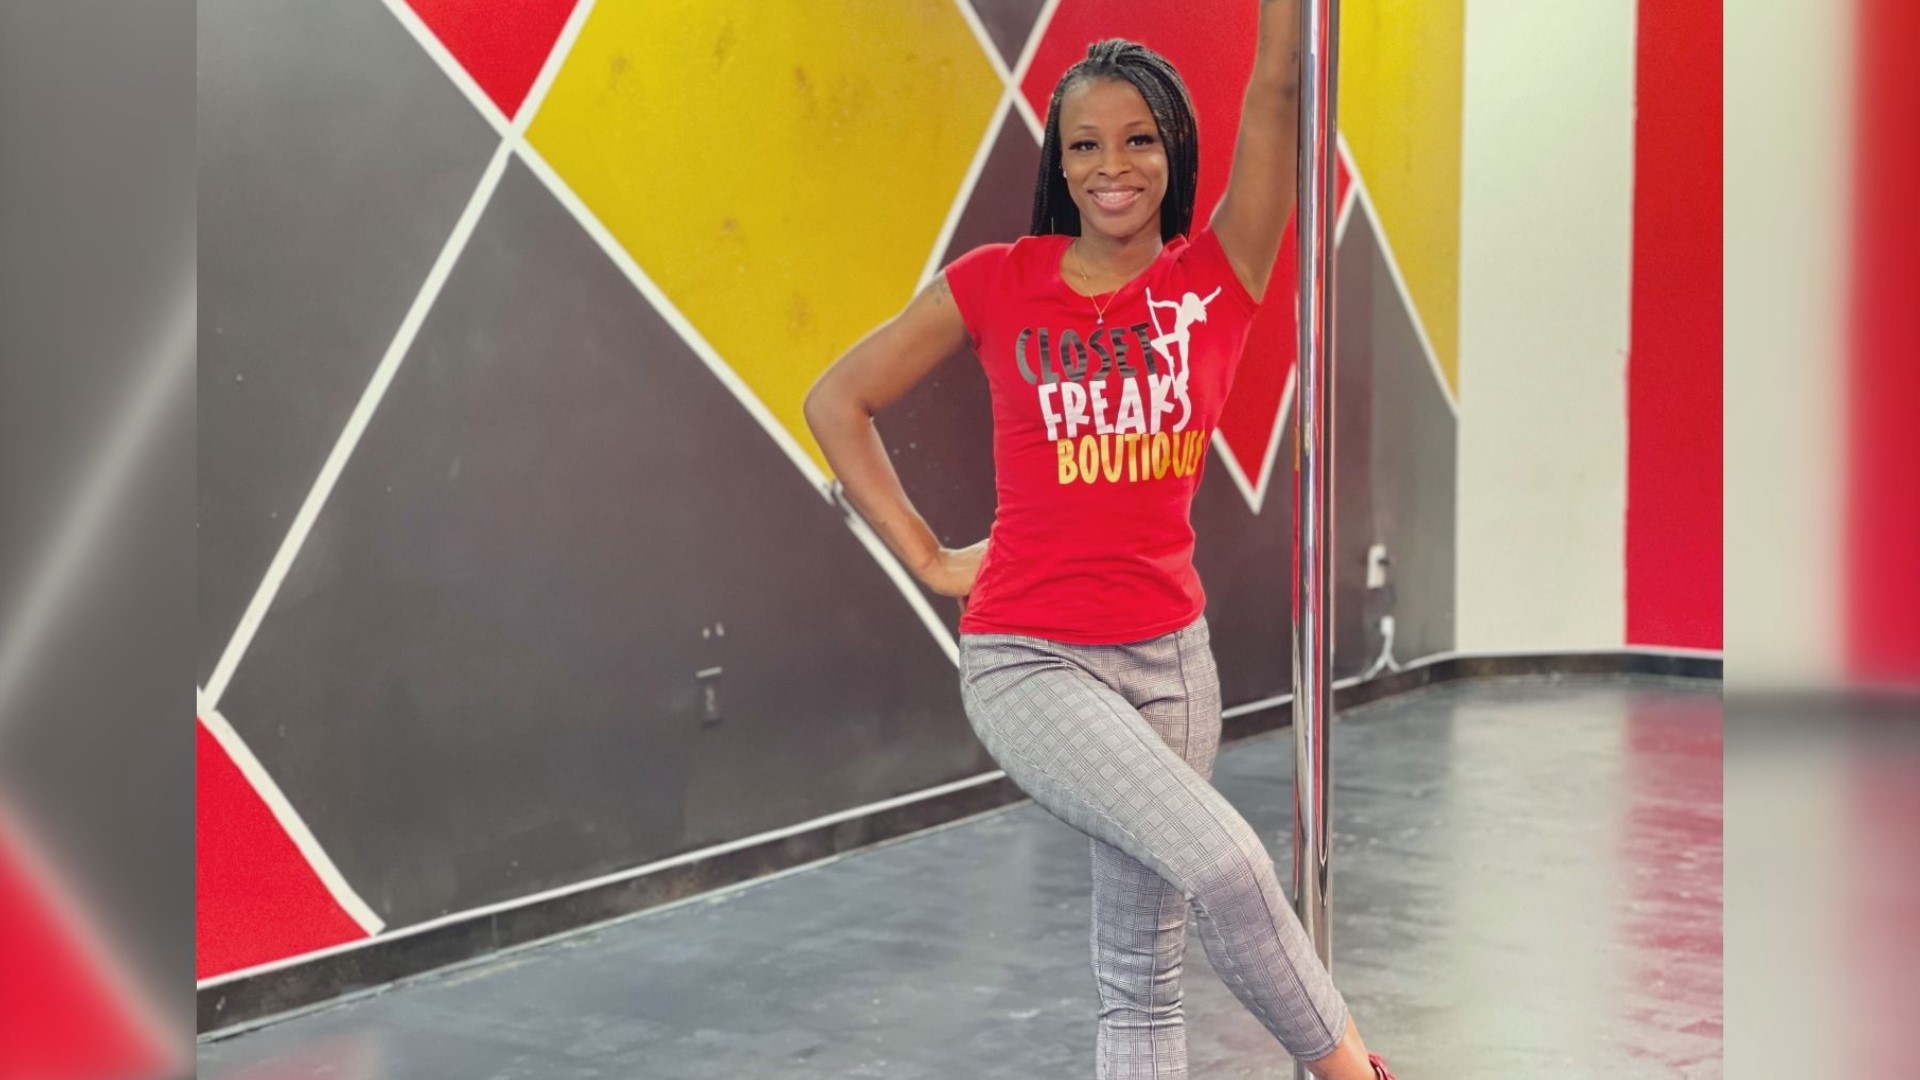 On April 9, Closet Freaks Studio on Pio Nono Avenue is opening its doors to anybody who loves to dance, wants to get fit, and wants a confidence boost.